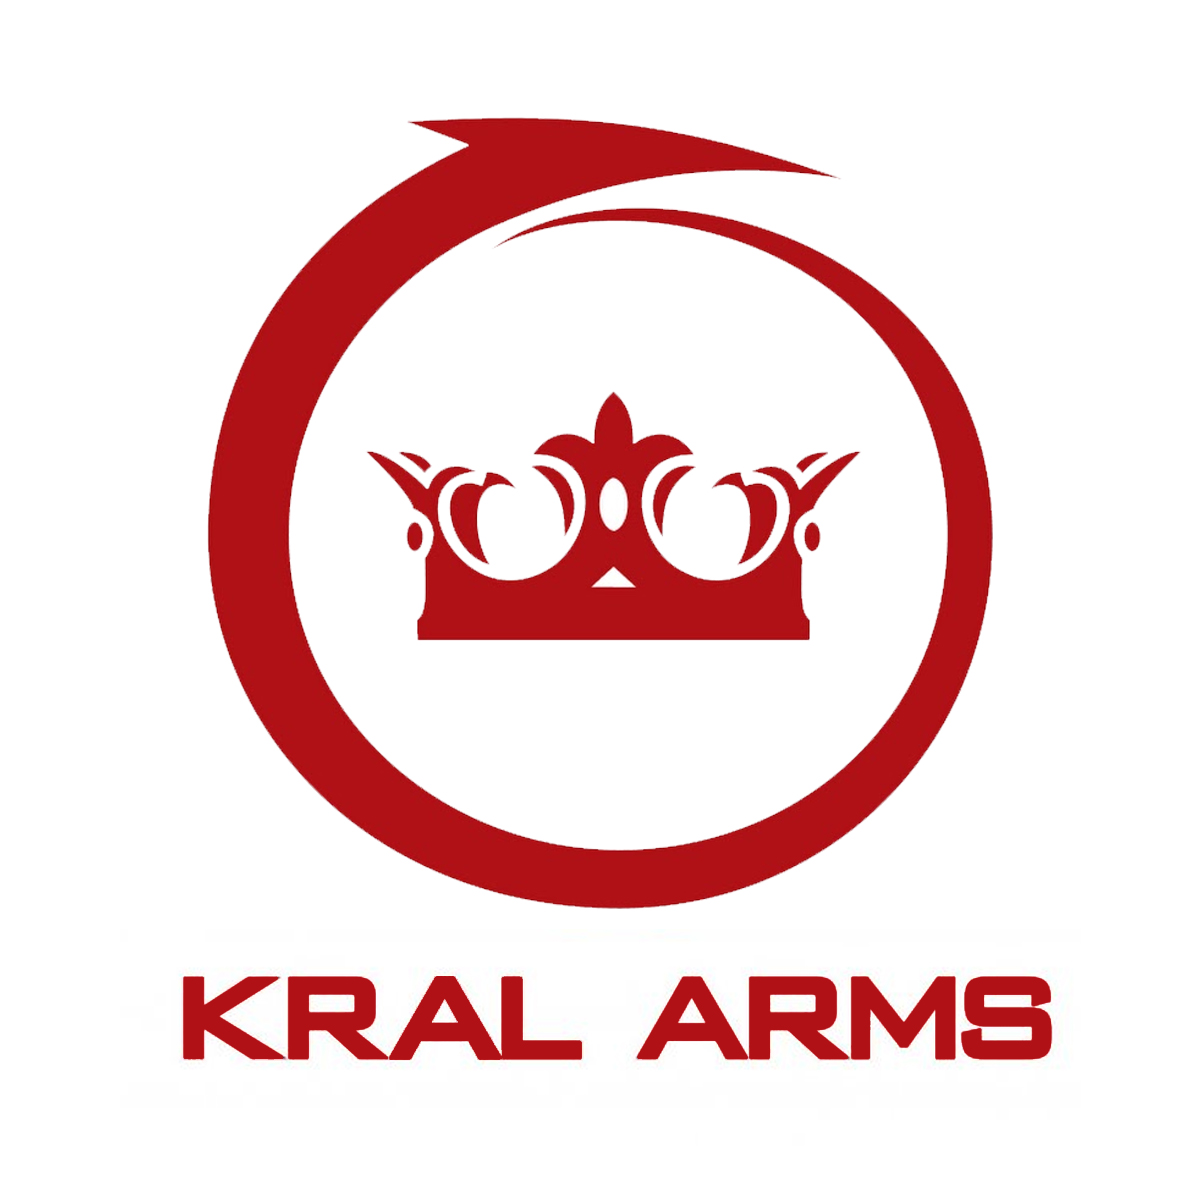 KRAL ARMS